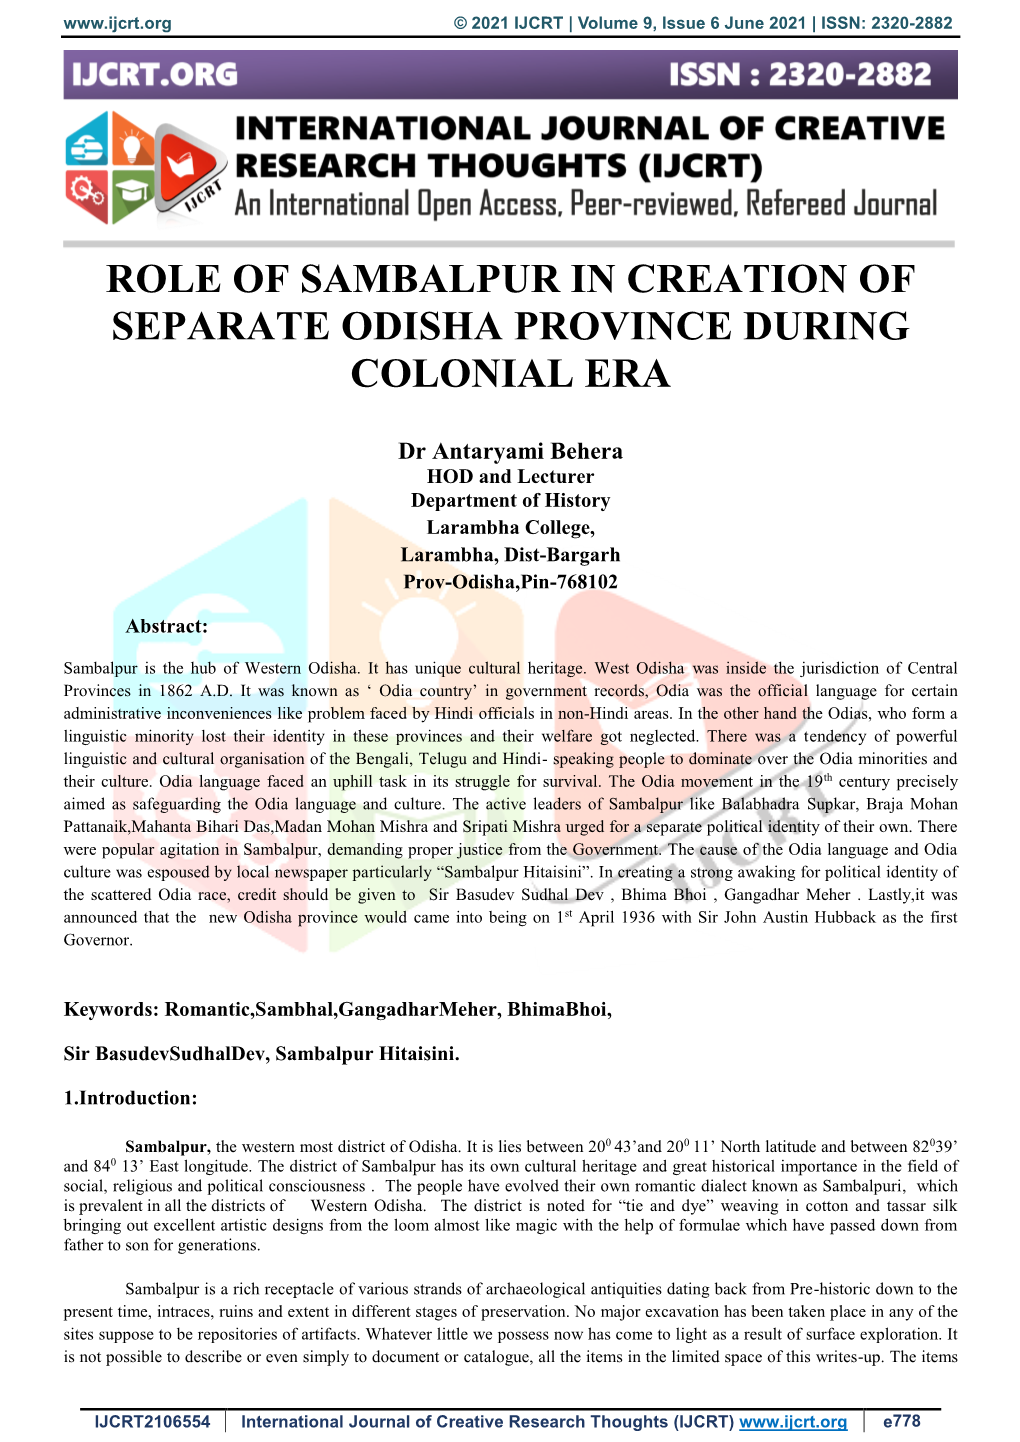 Role of Sambalpur in Creation of Separate Odisha Province During Colonial Era